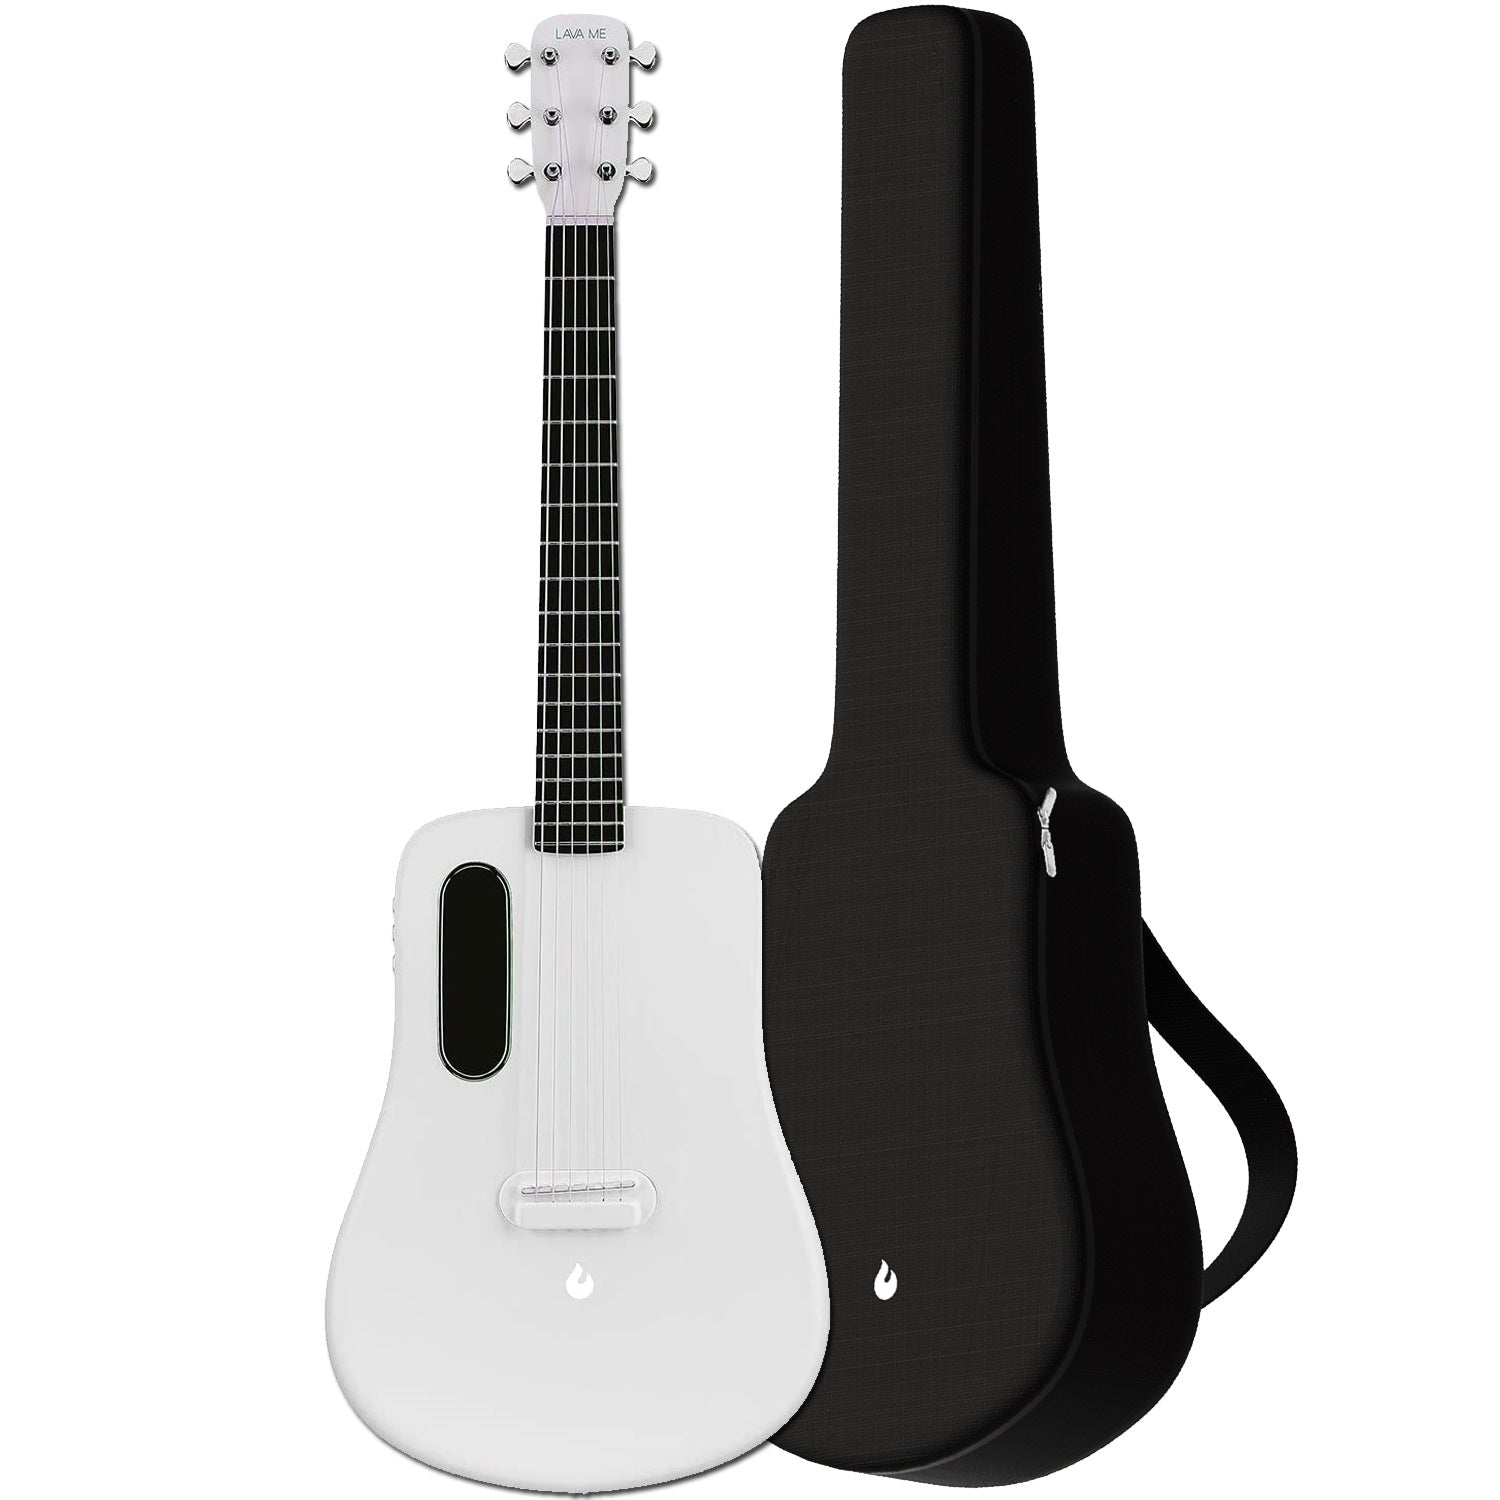 LAVA ME 2 FREEBOOST WHITE, Acoustic Guitar for sale at Richards Guitars.